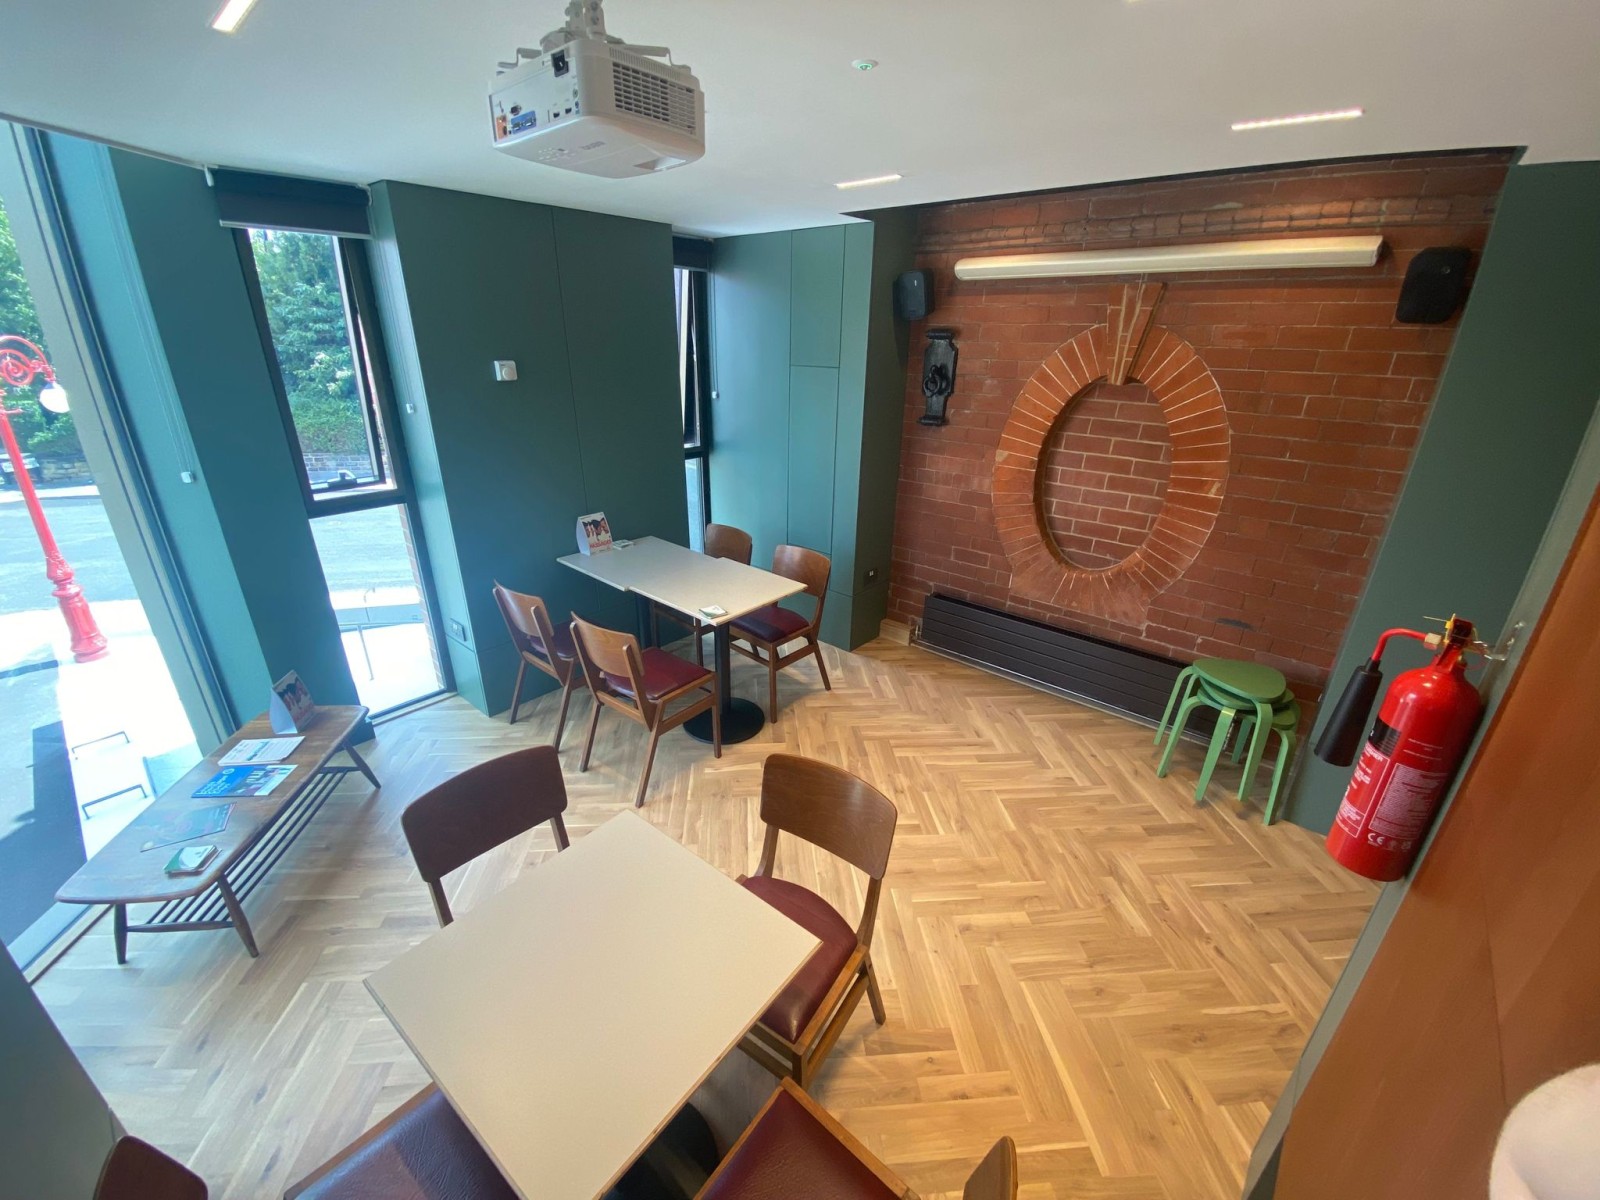 View of our new Community Room